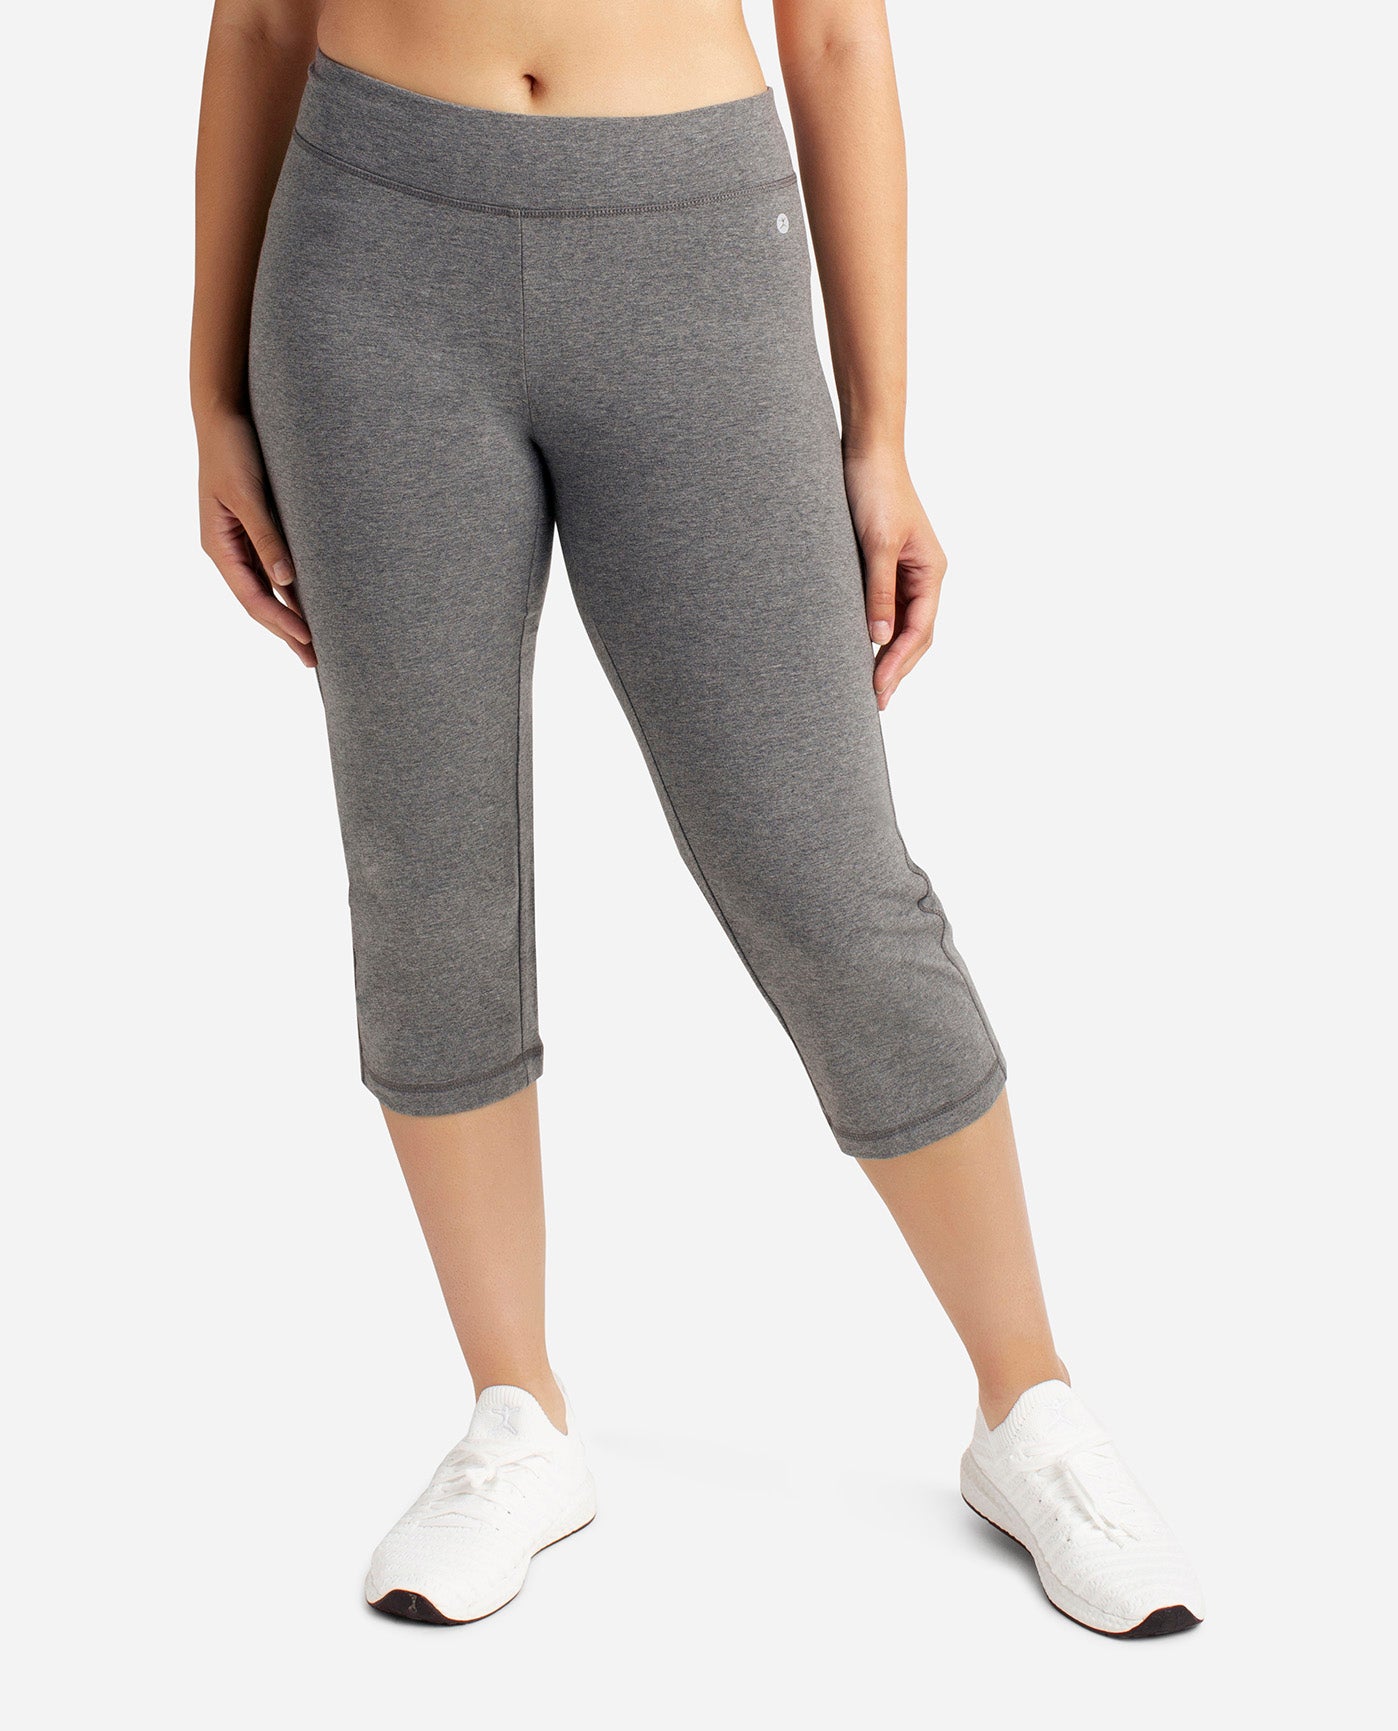 BCG Women's Stretch Woven Capri | Free Shipping at Academy